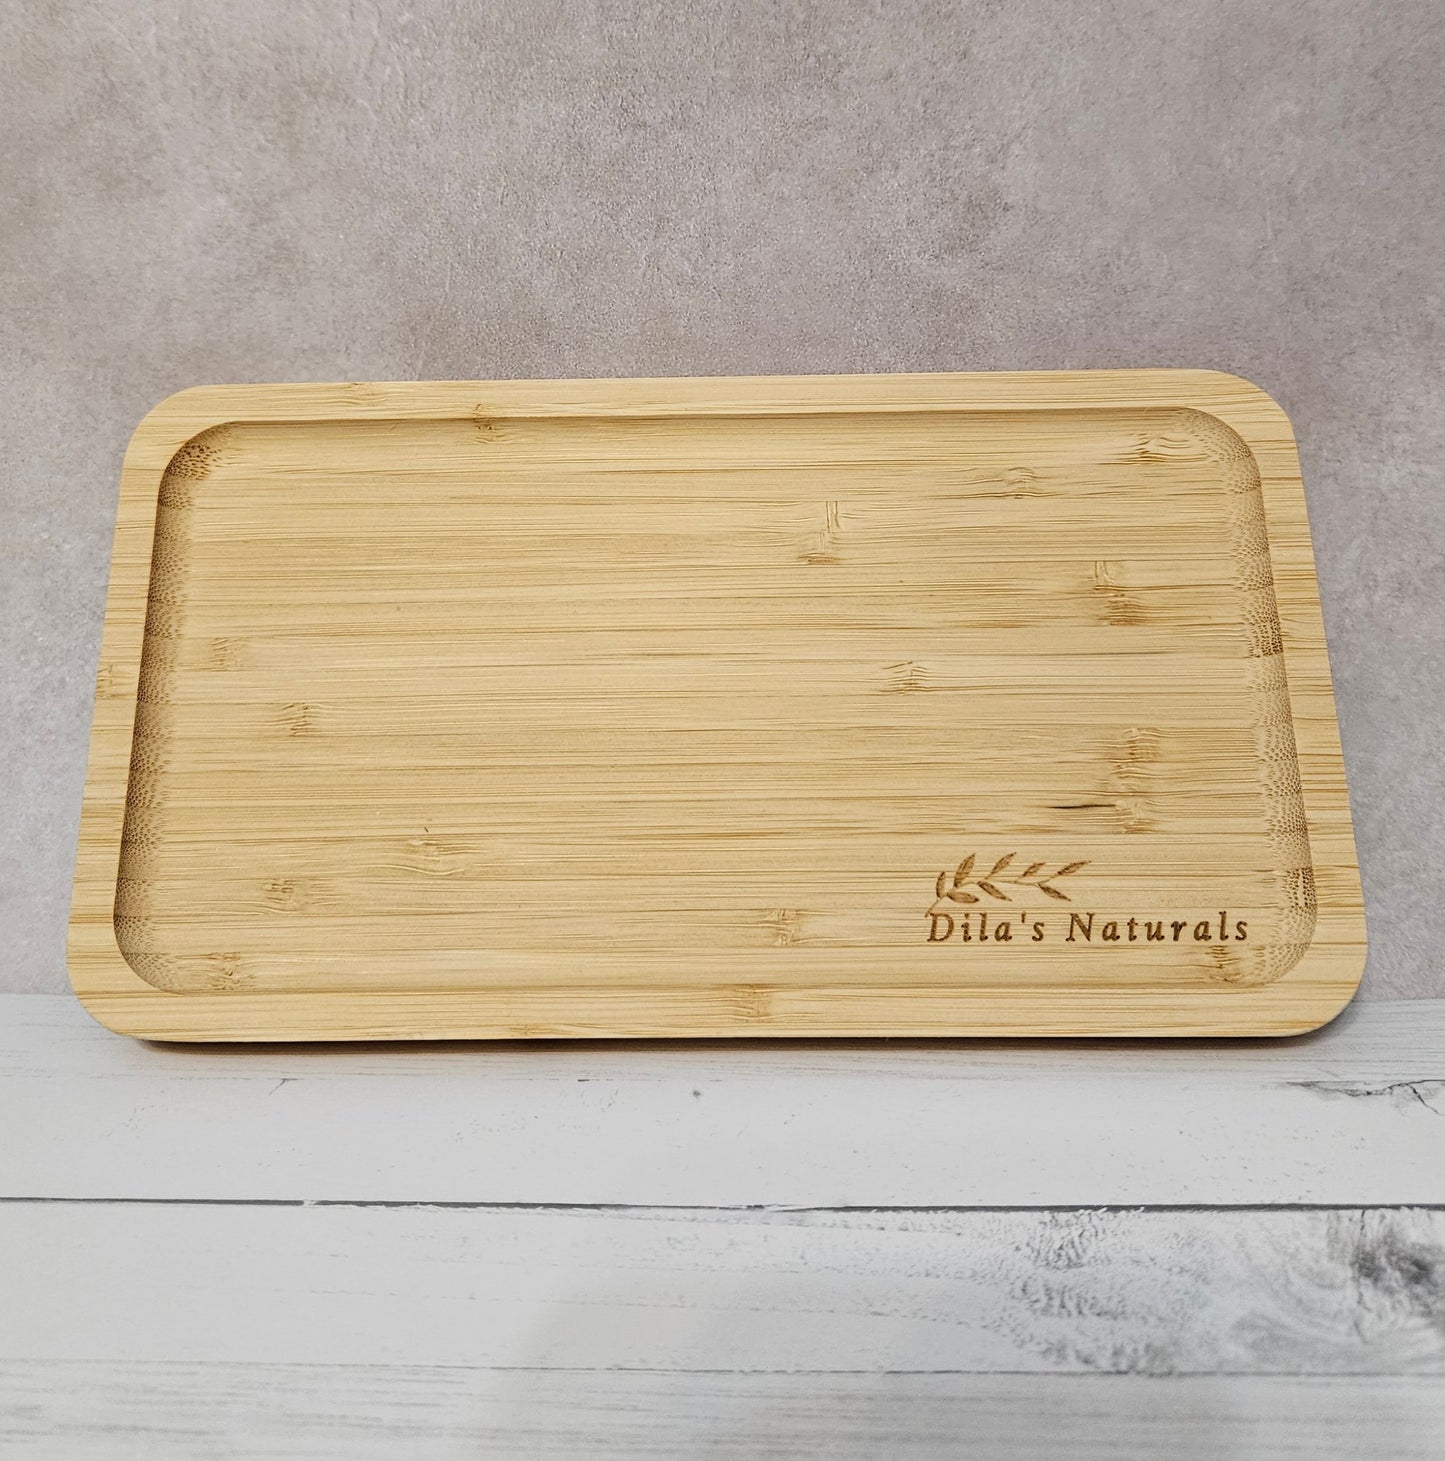 9.5 inch x 5 inch - Bamboo Tray - DILA'S NATURALS